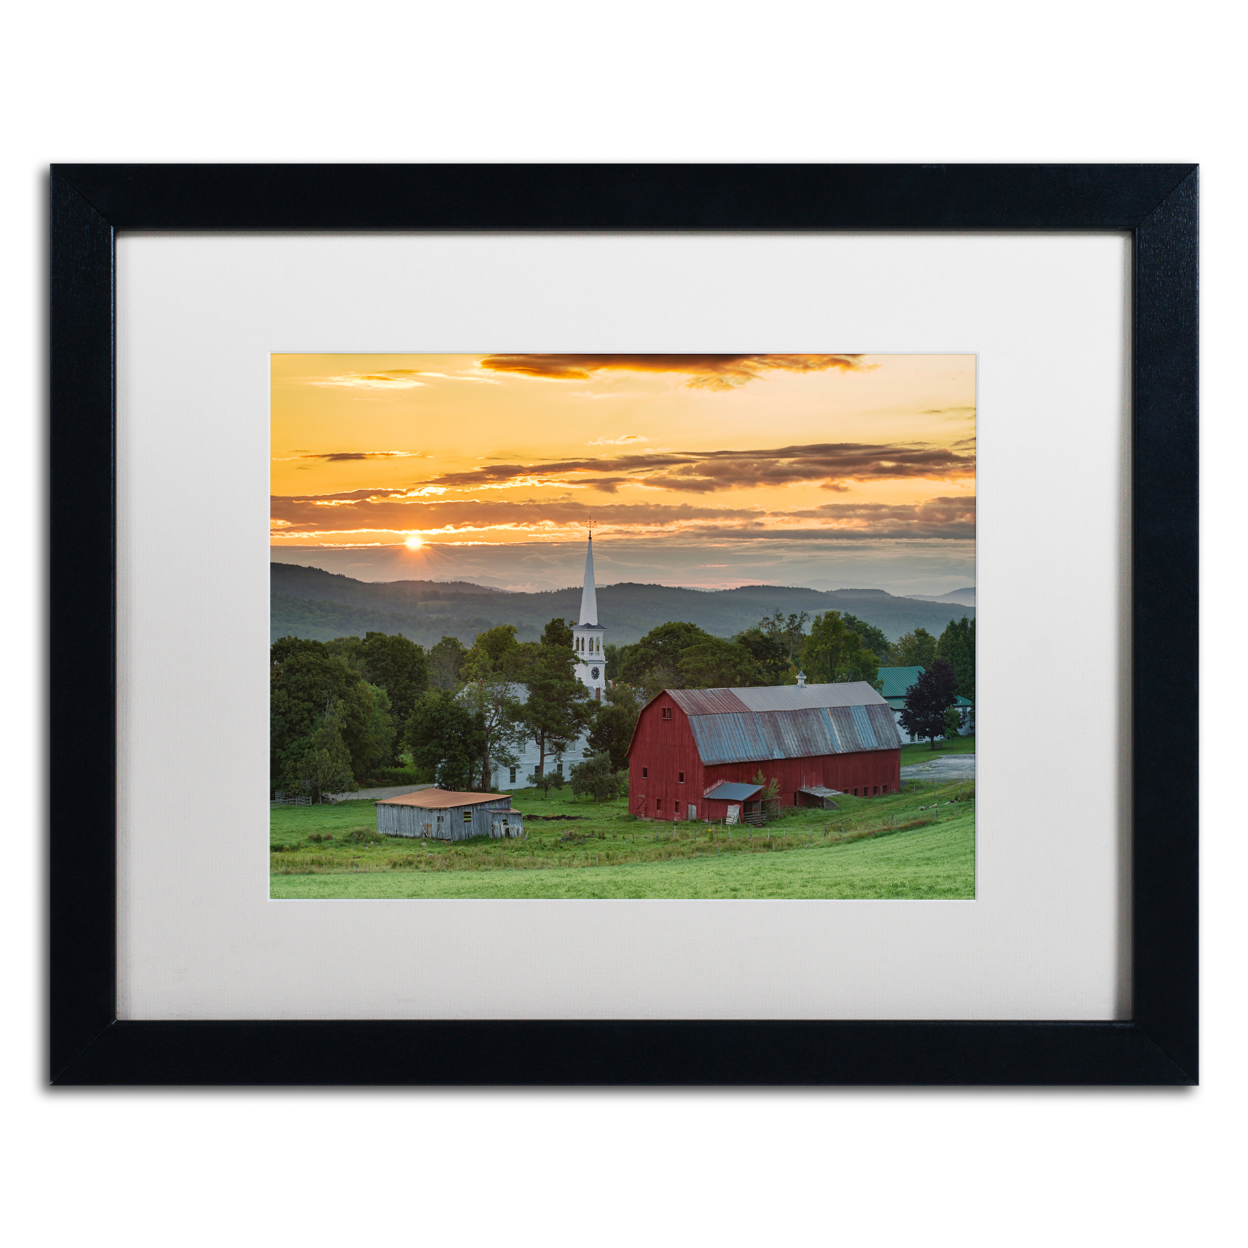 Michael Blanchette Photography 'A Farm And A Prayer' Black Wooden Framed Art 18 X 22 Inches